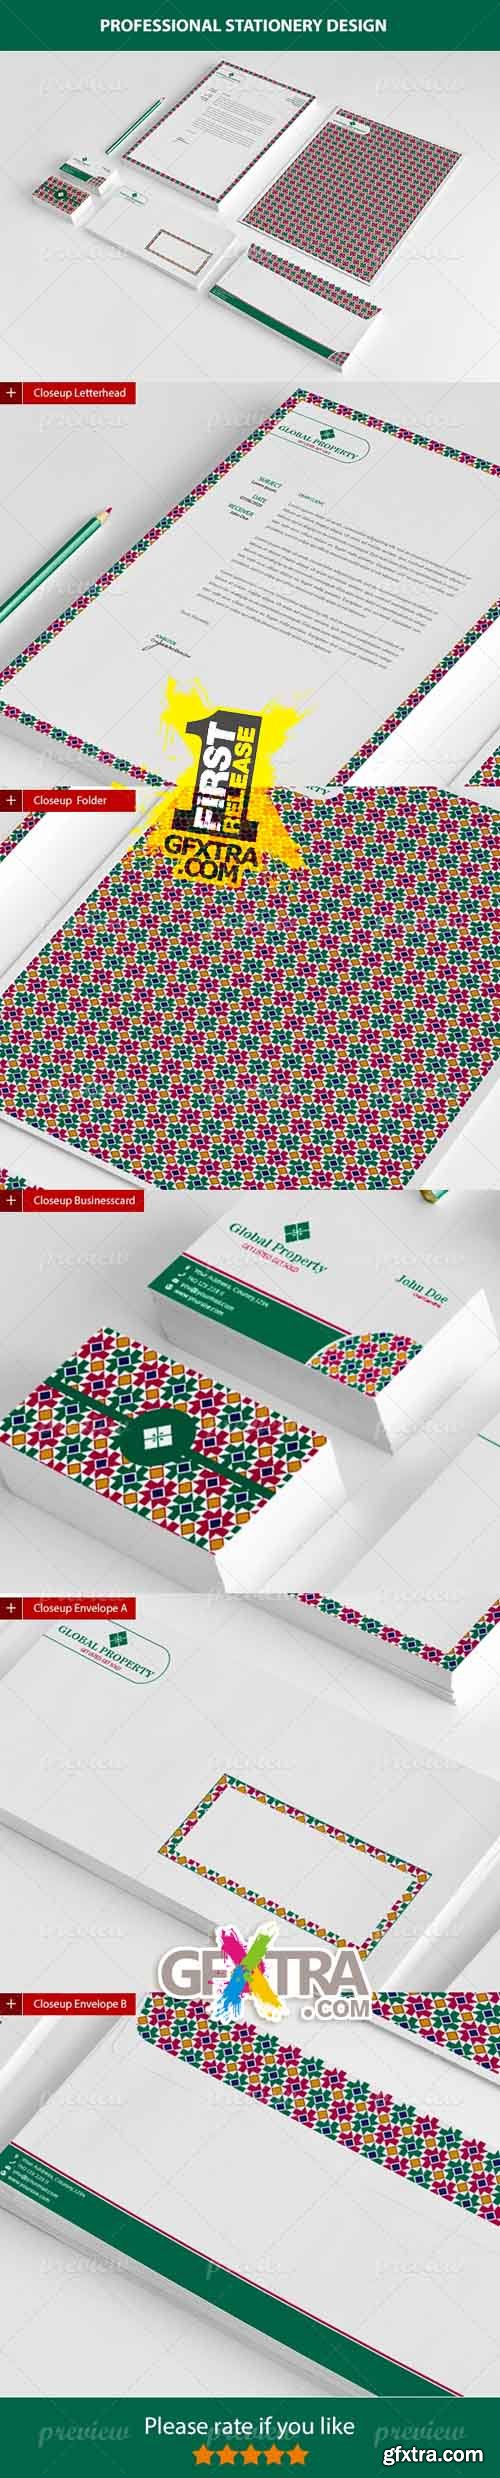 Global Property Stationery Template